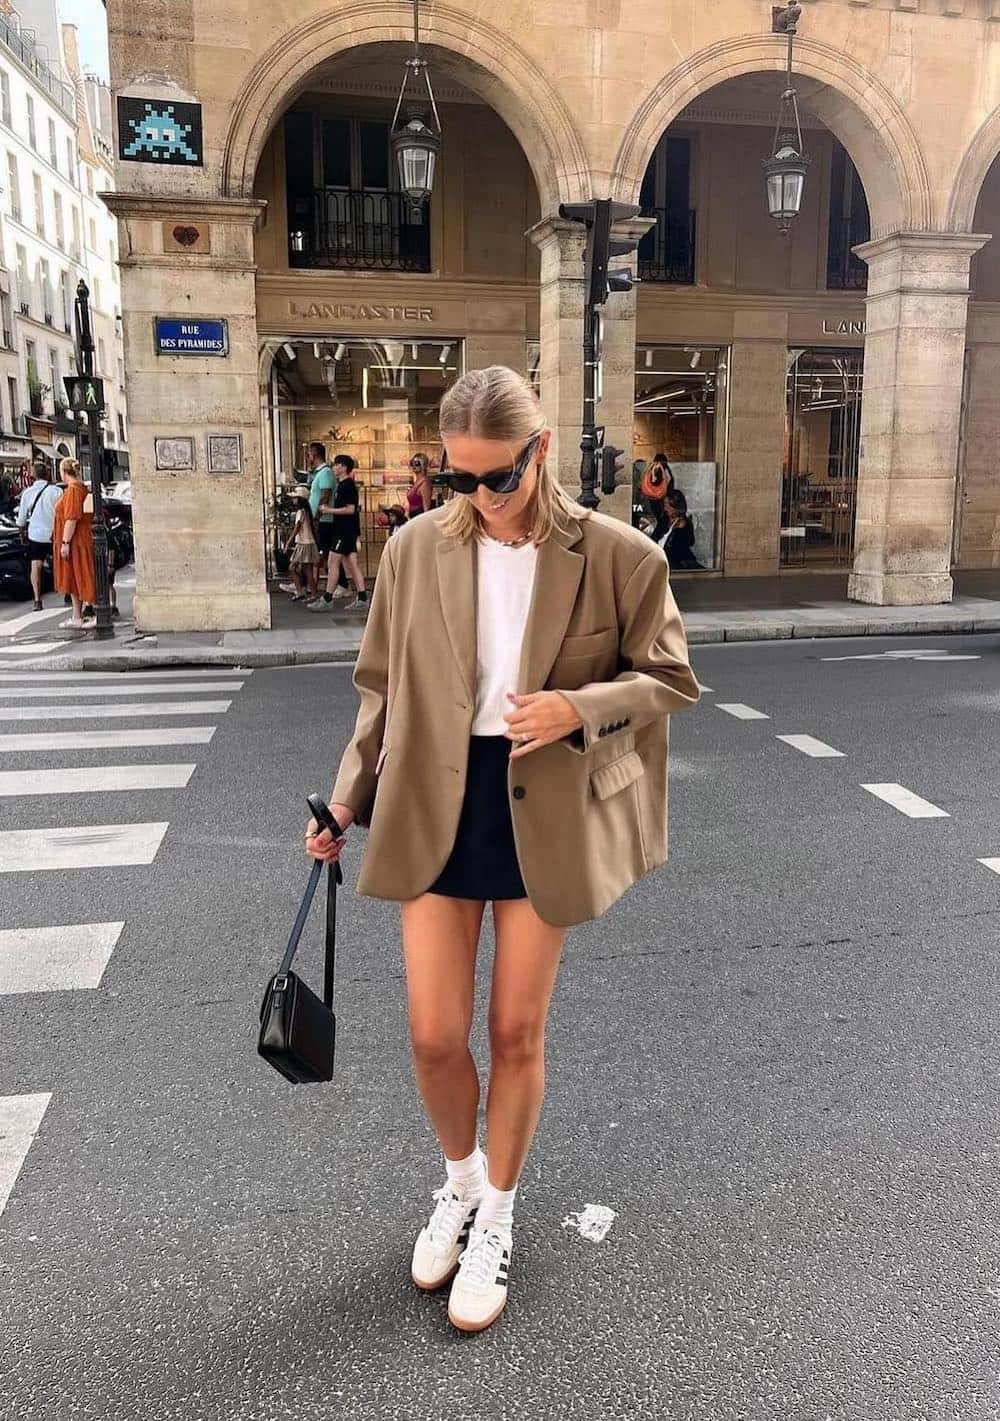 Woman walking in the street wearing a black skirt, a white t-shirt and an oversized blazer with sneakers.